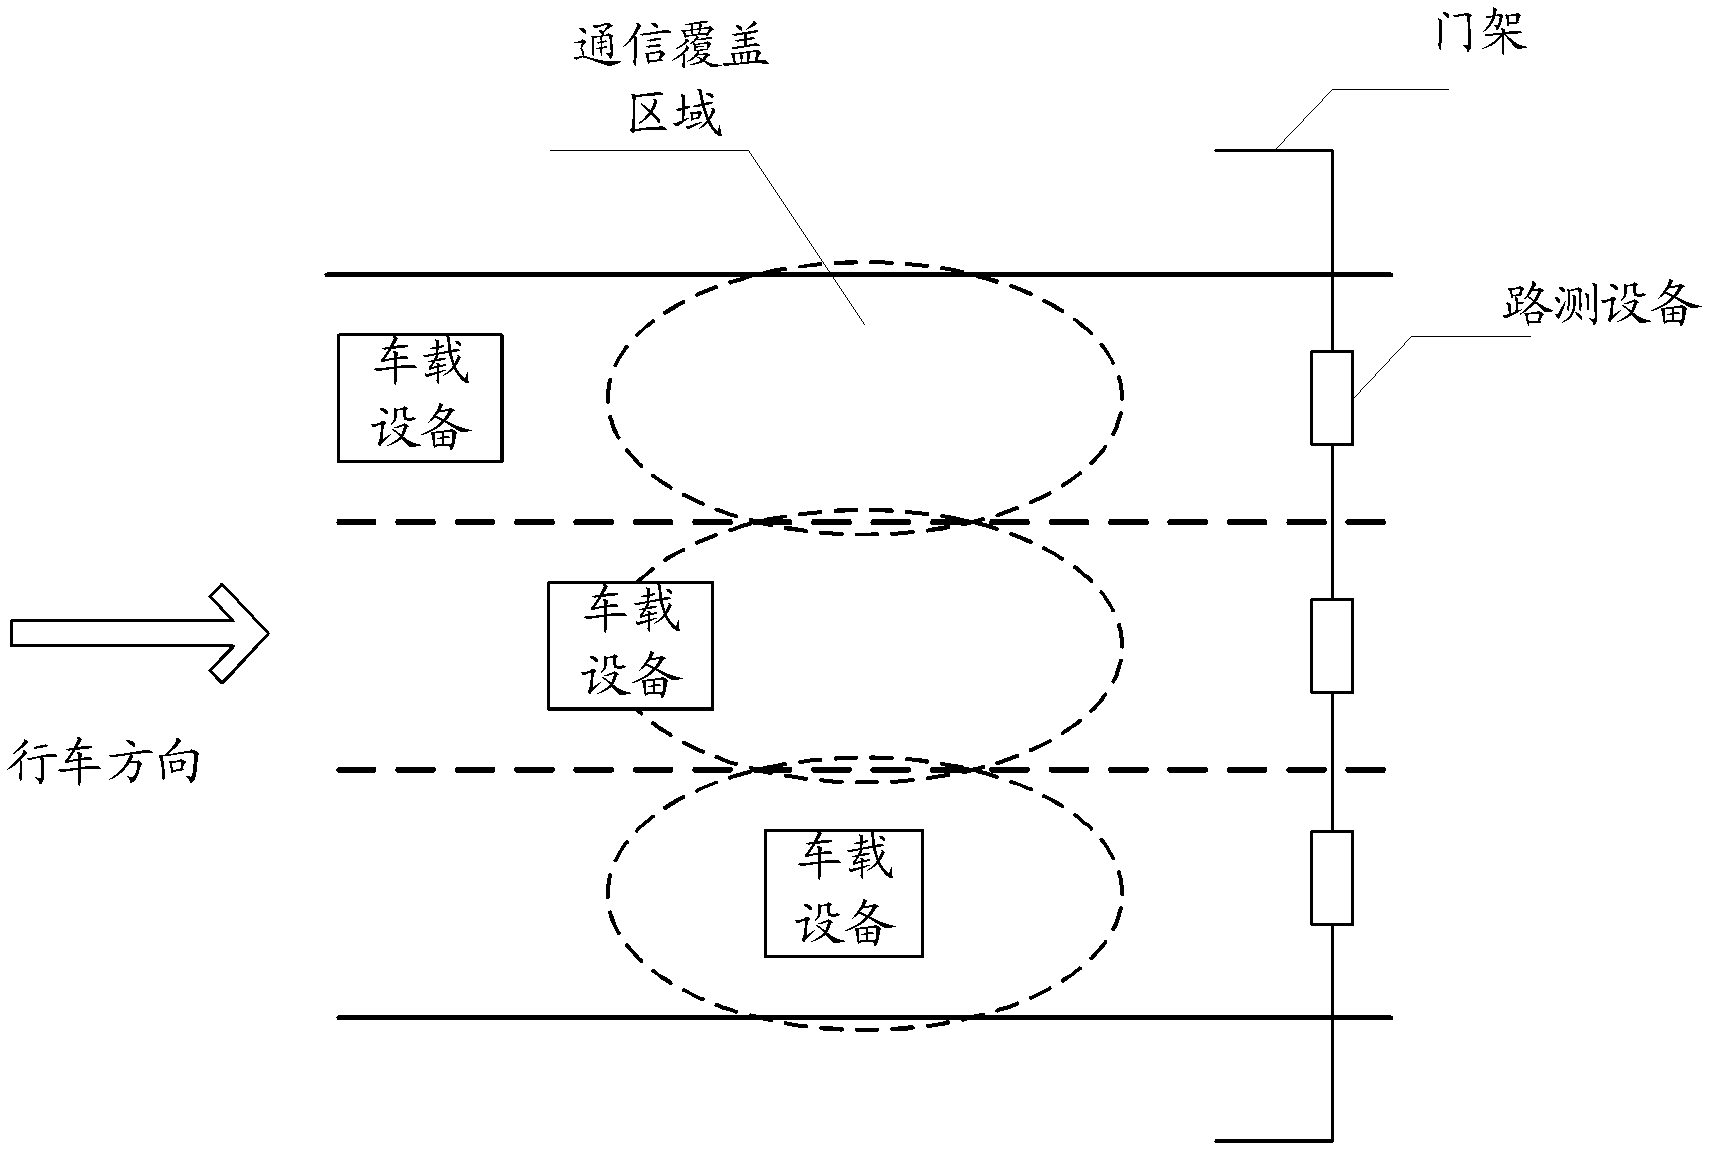 Roadside equipment, method and system for carrying out service processing on multi-lane free flow